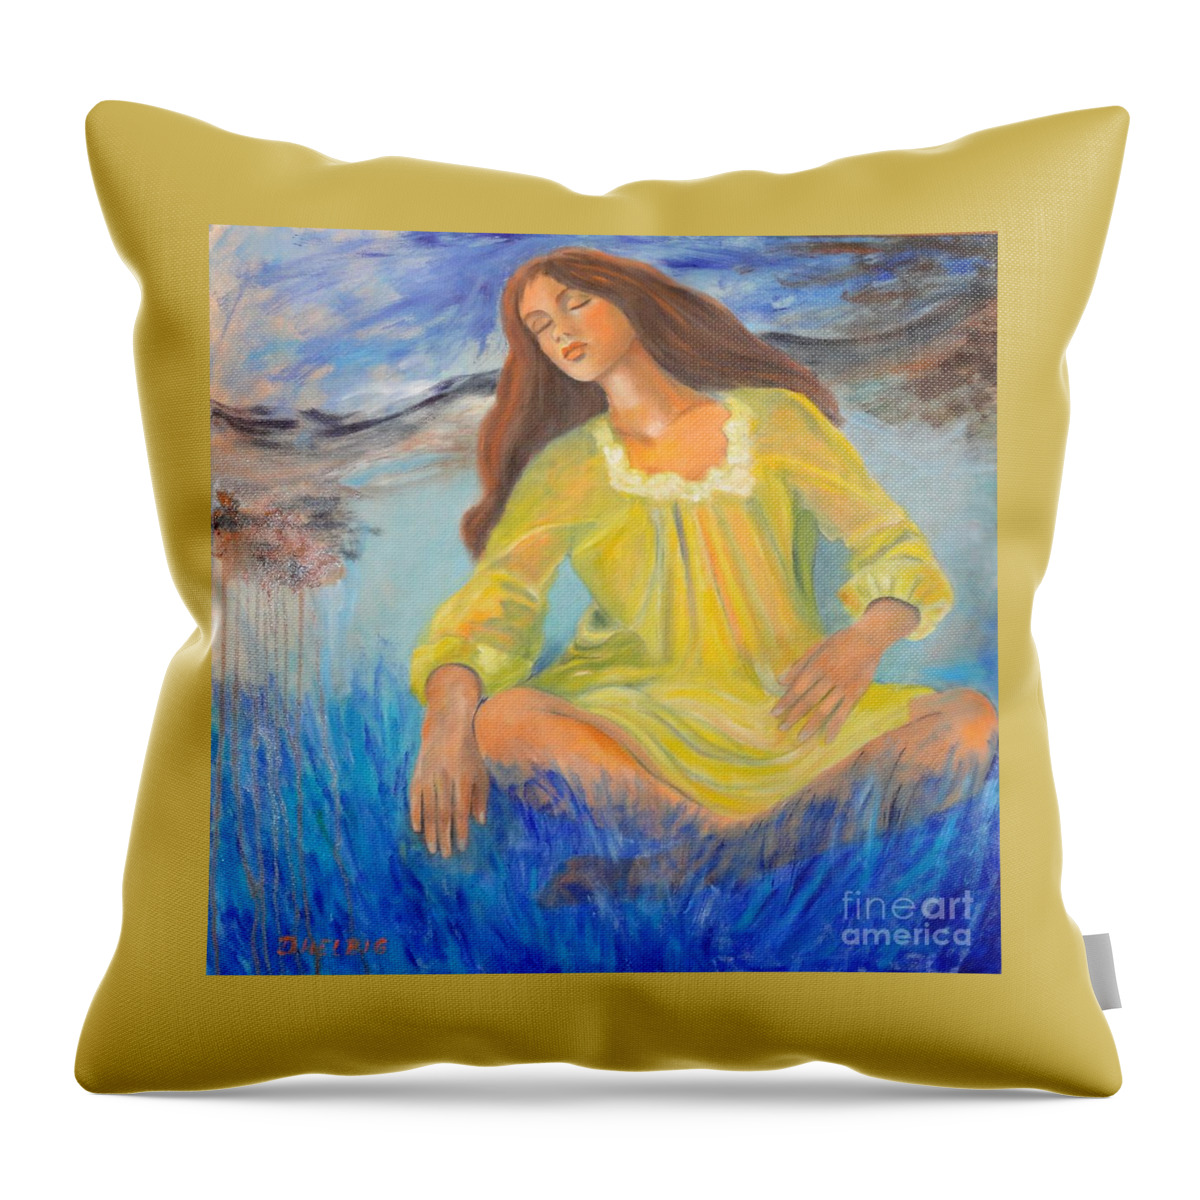 Girl-in-meditation Throw Pillow featuring the painting Meditation by Dagmar Helbig